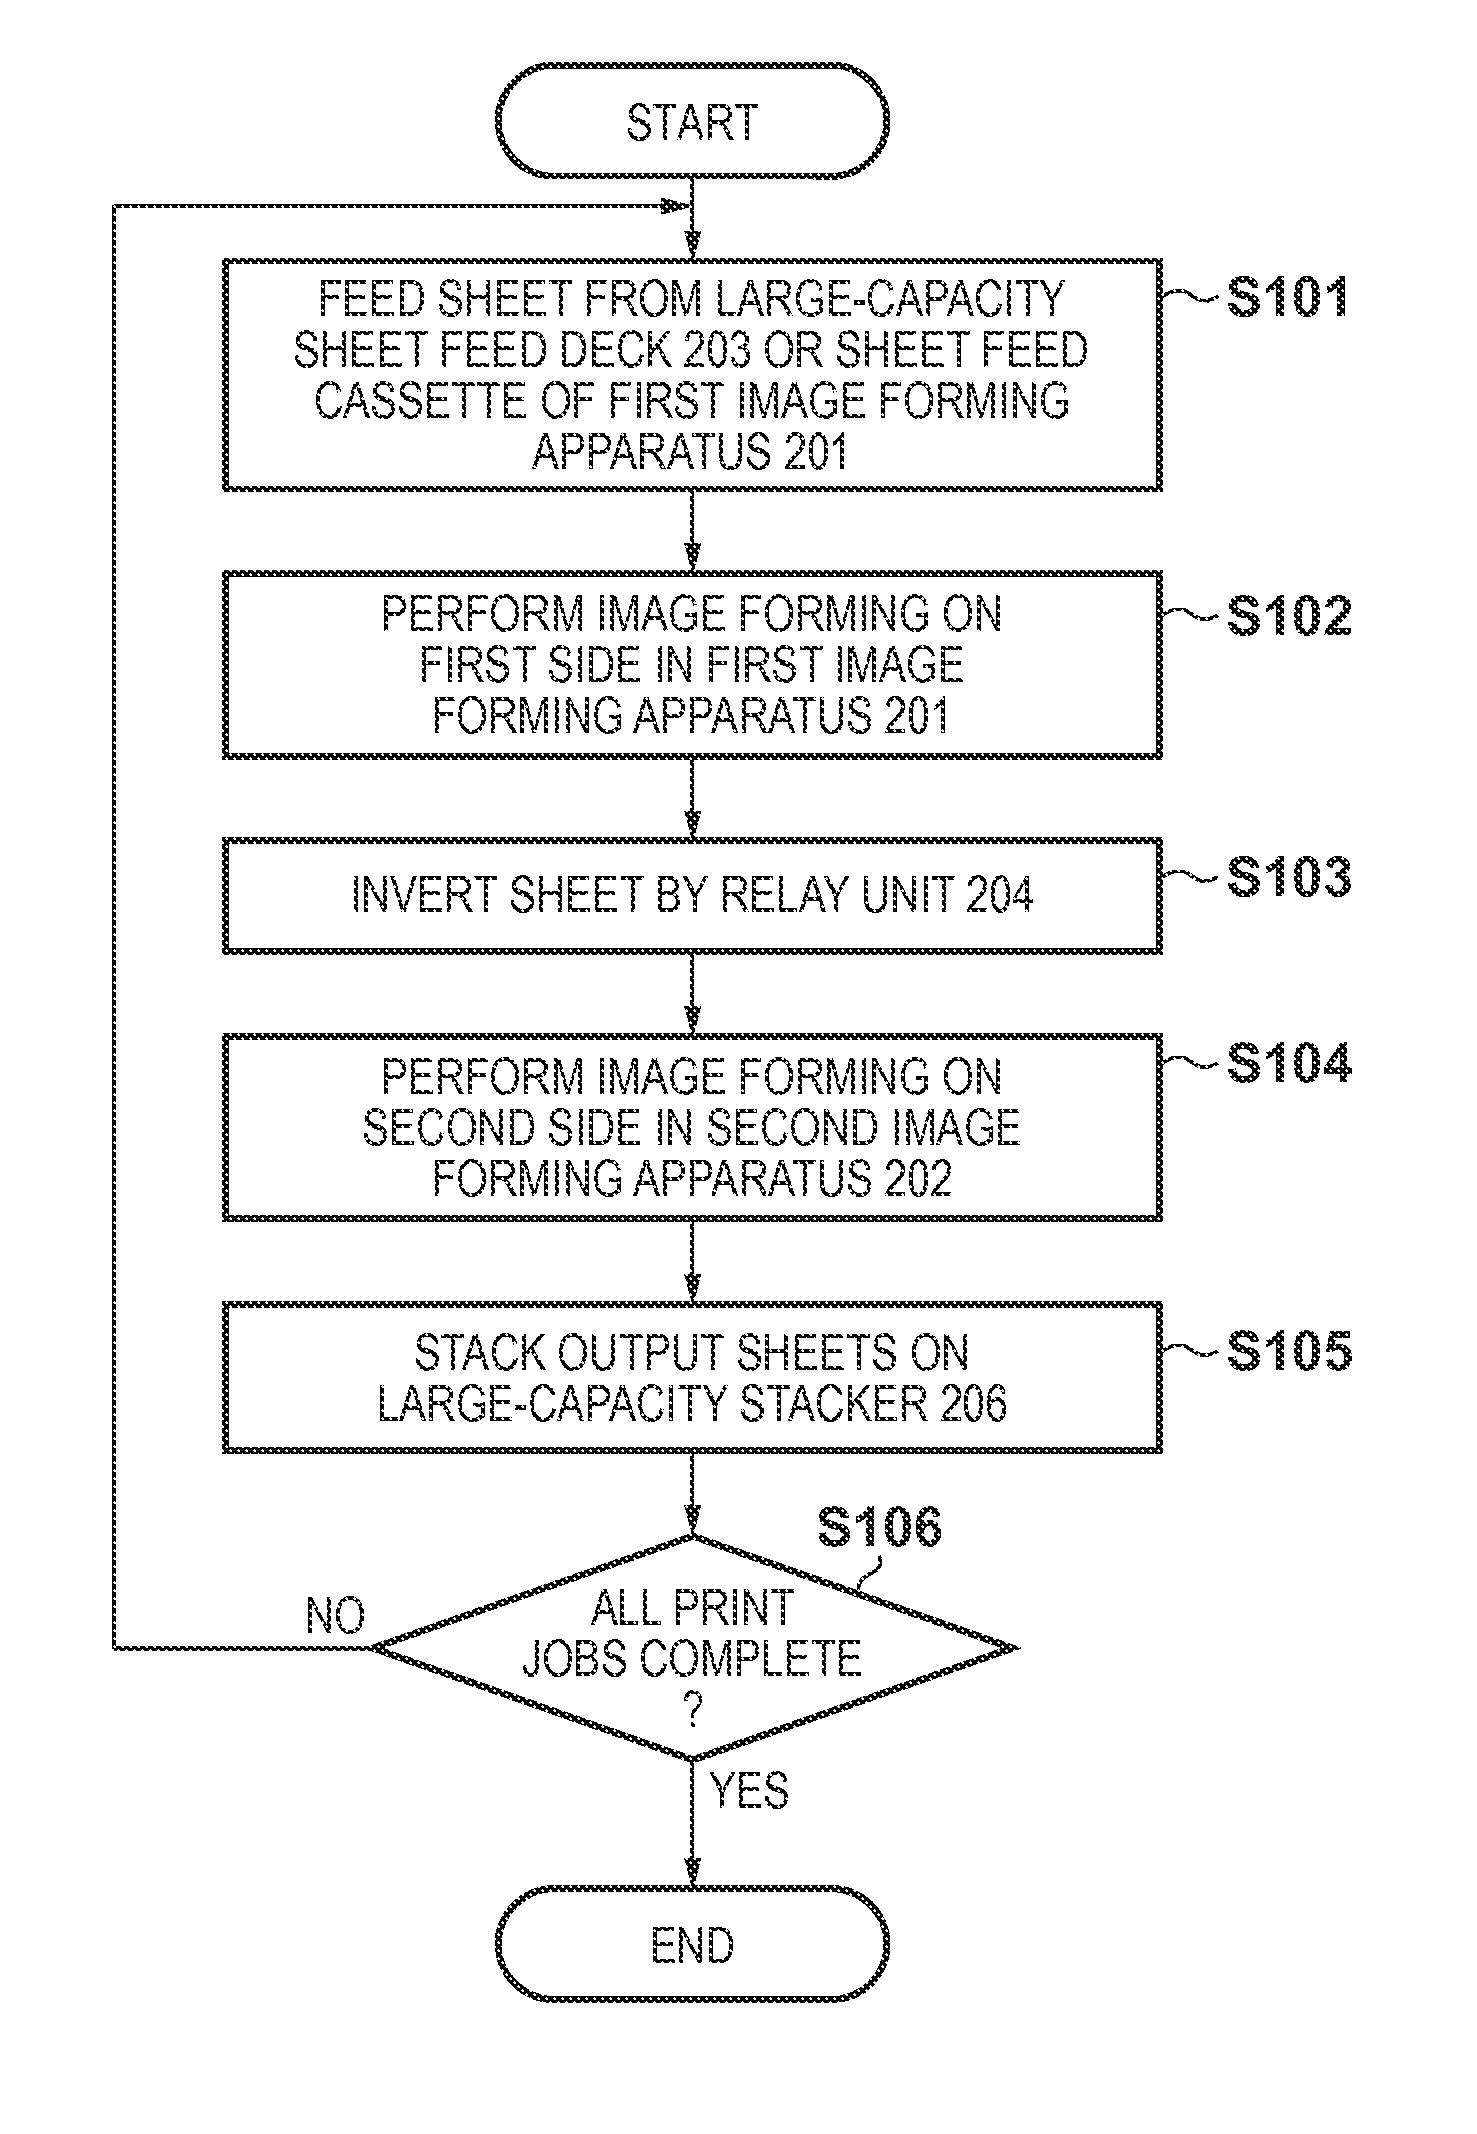 Image forming system and control apparatus